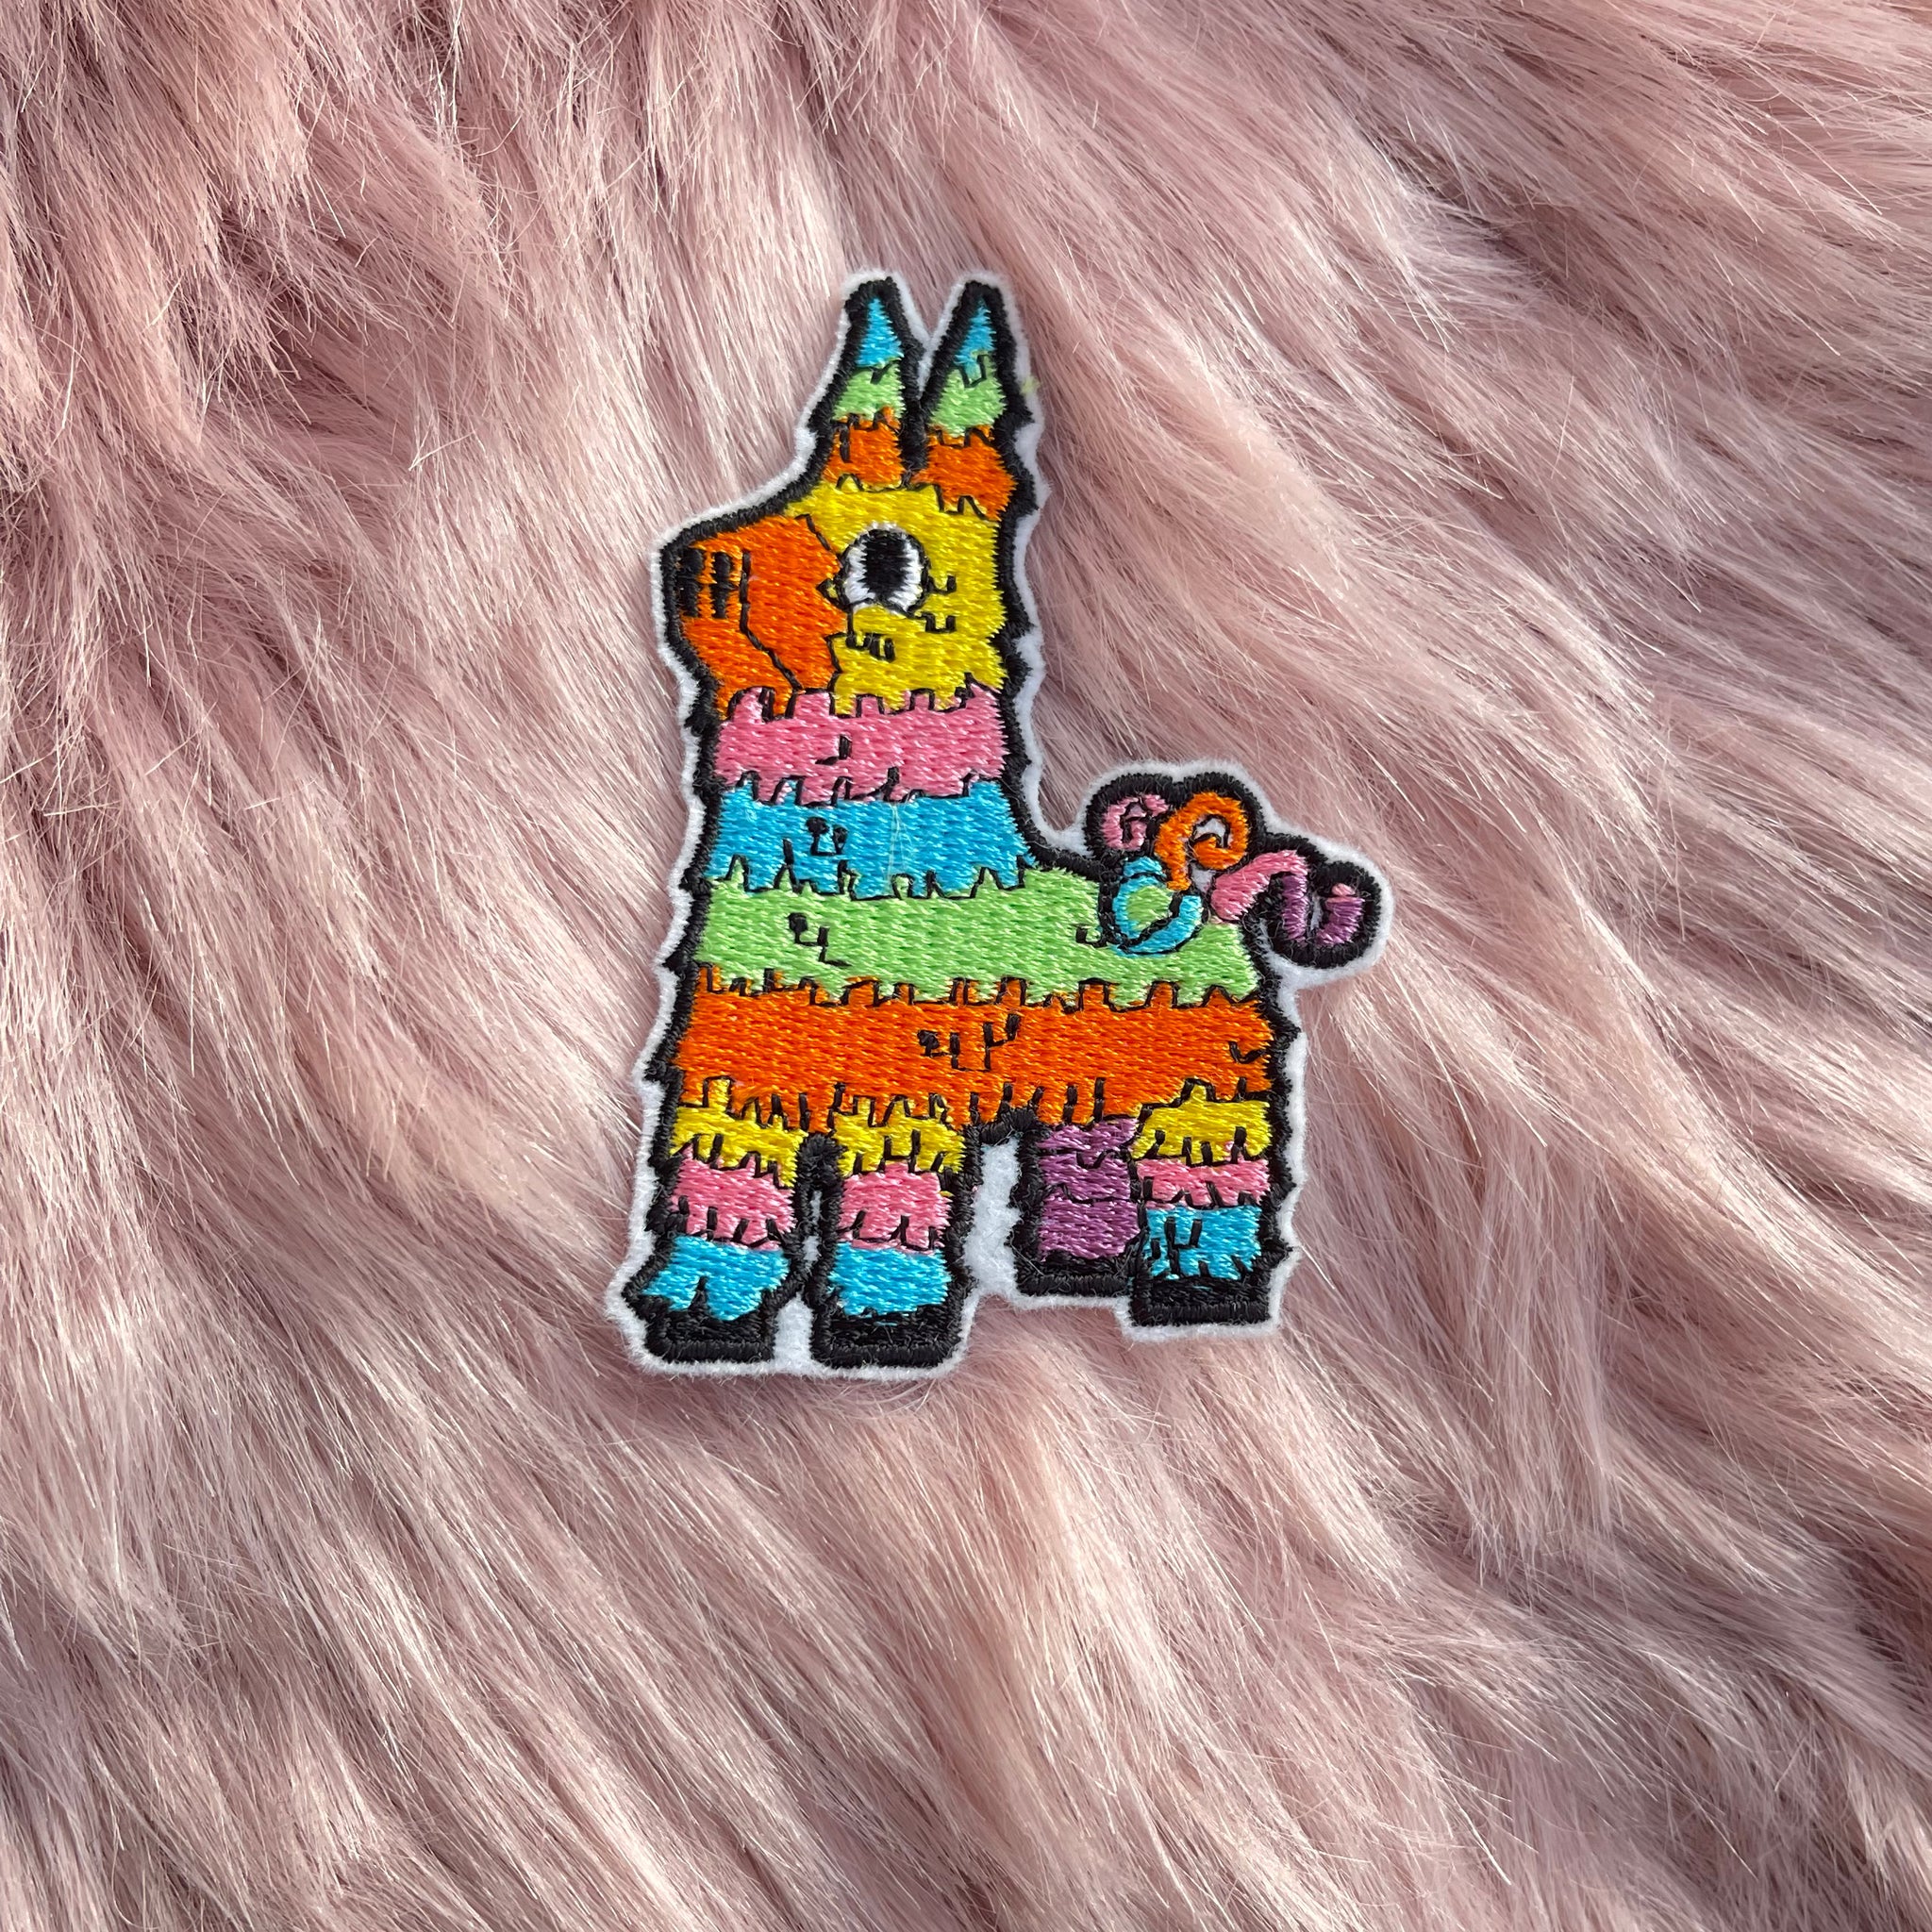 Cute Iron On Embroidery Patch Mexican Piñata Pinata accessory